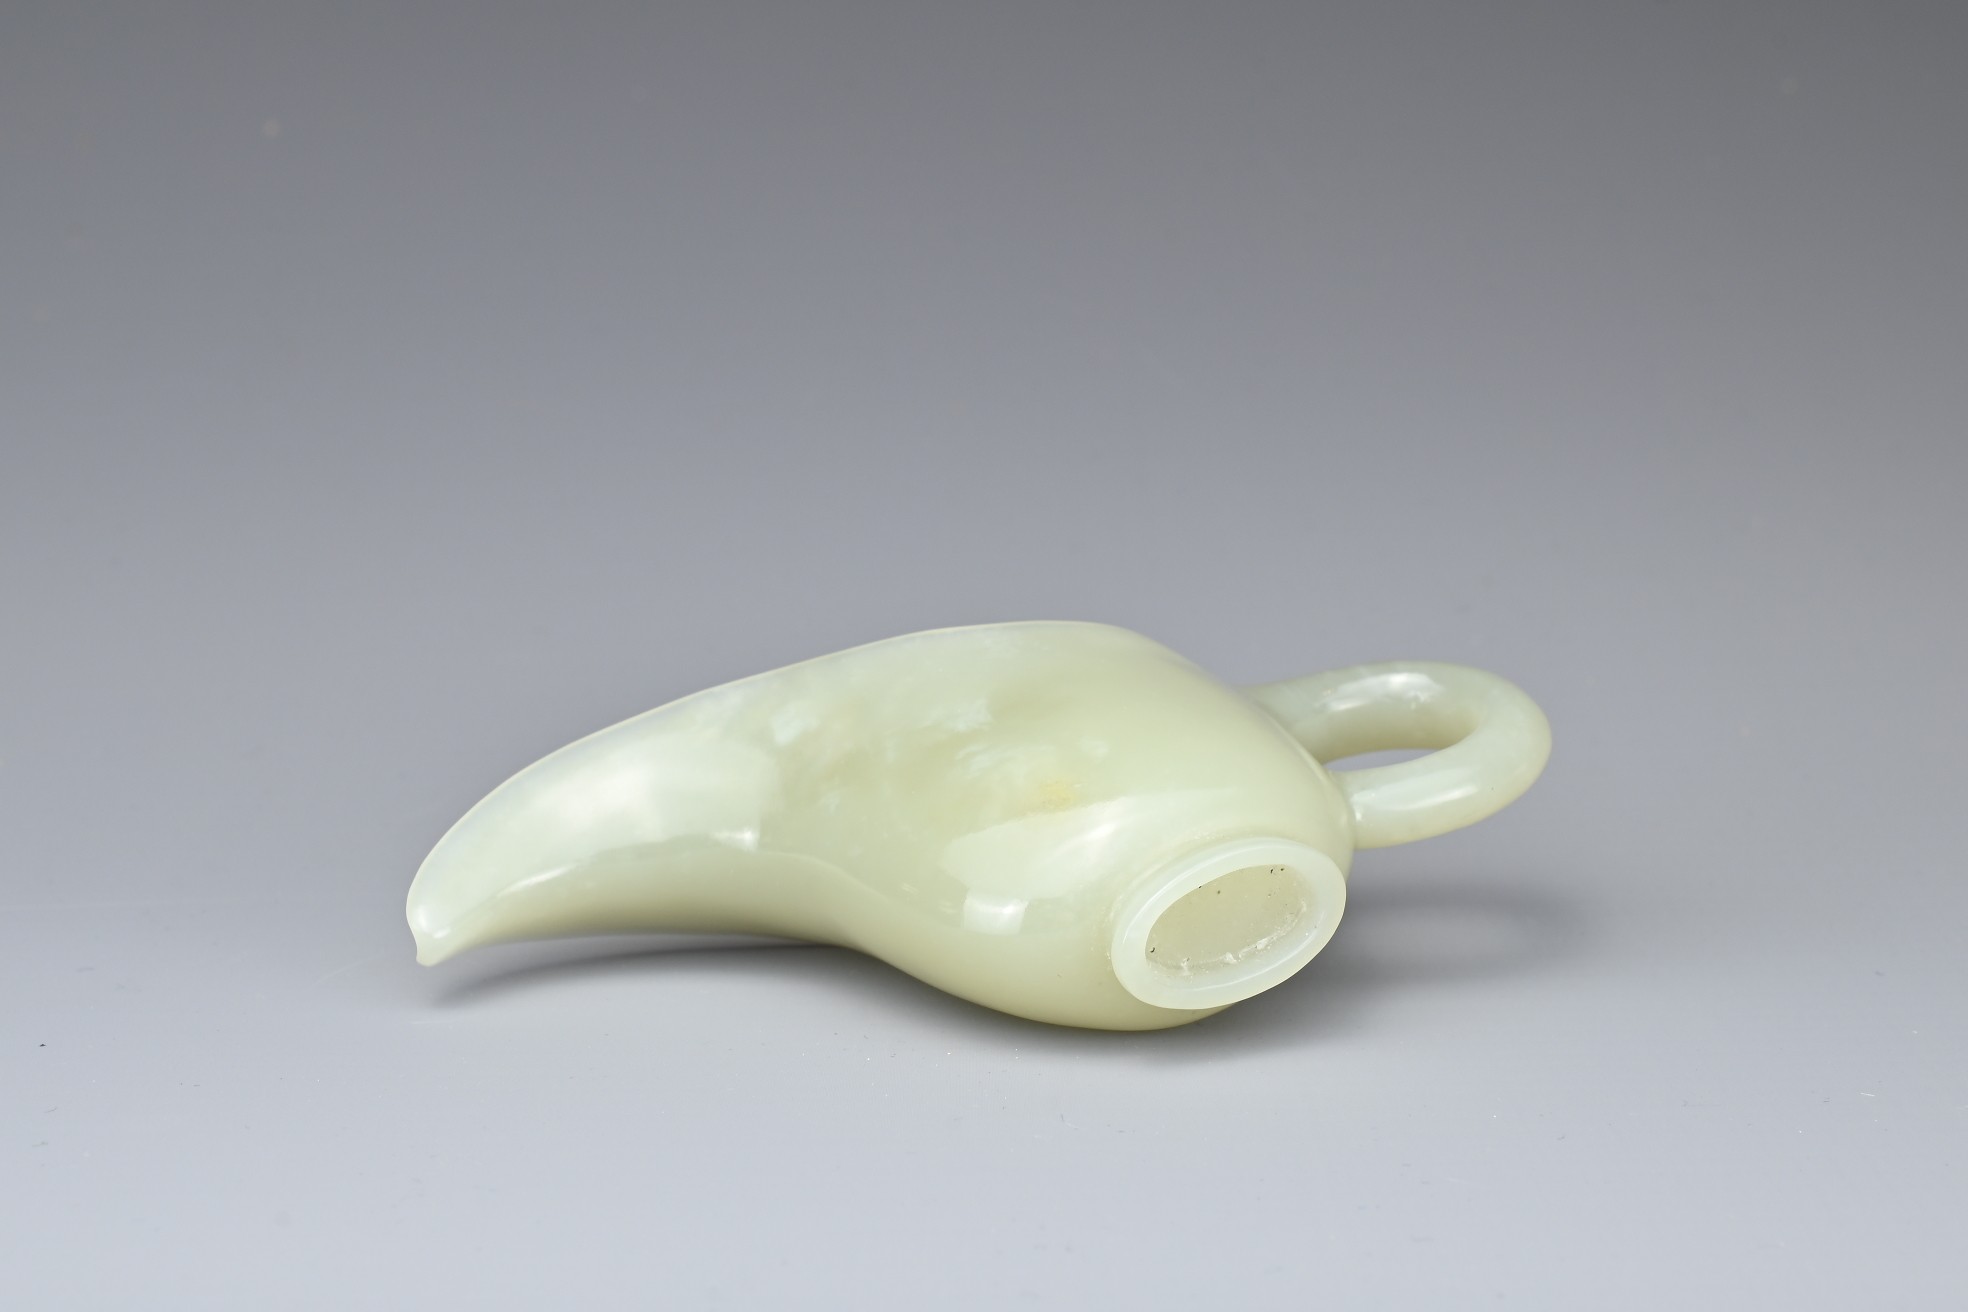 A CHINESE PALE CELADON JADE CUP. Of slender form with a looped handle and curved spout. 10.5cm - Image 6 of 7